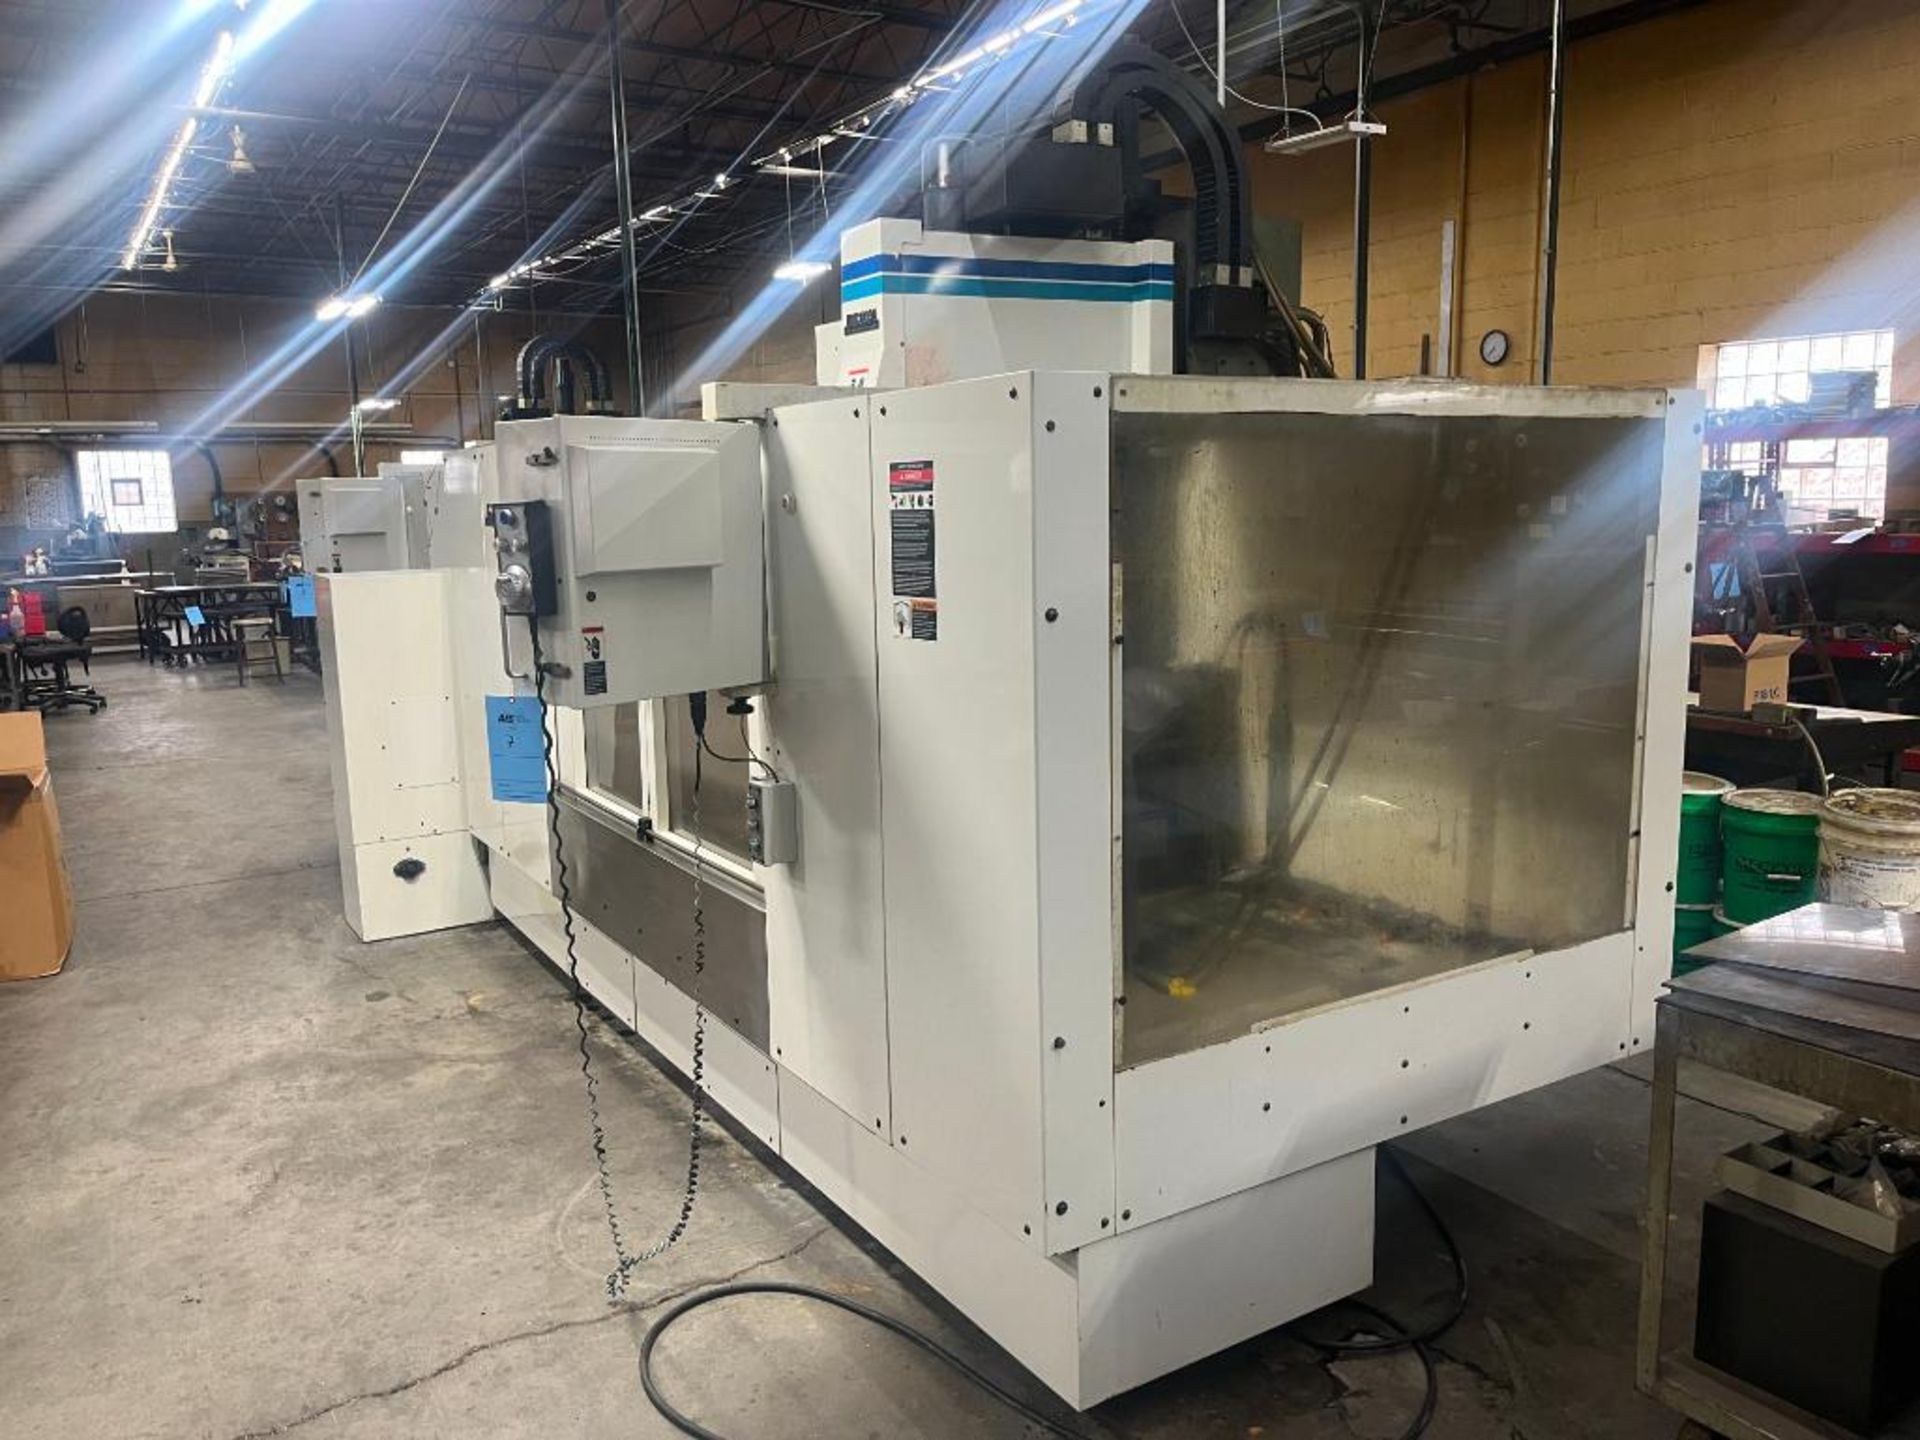 Fadal CNC Vertical Machining Center Model Model 907-1 VMC 6030HT, S/N 9704645 (1997) with Fadal CNC8 - Image 2 of 33